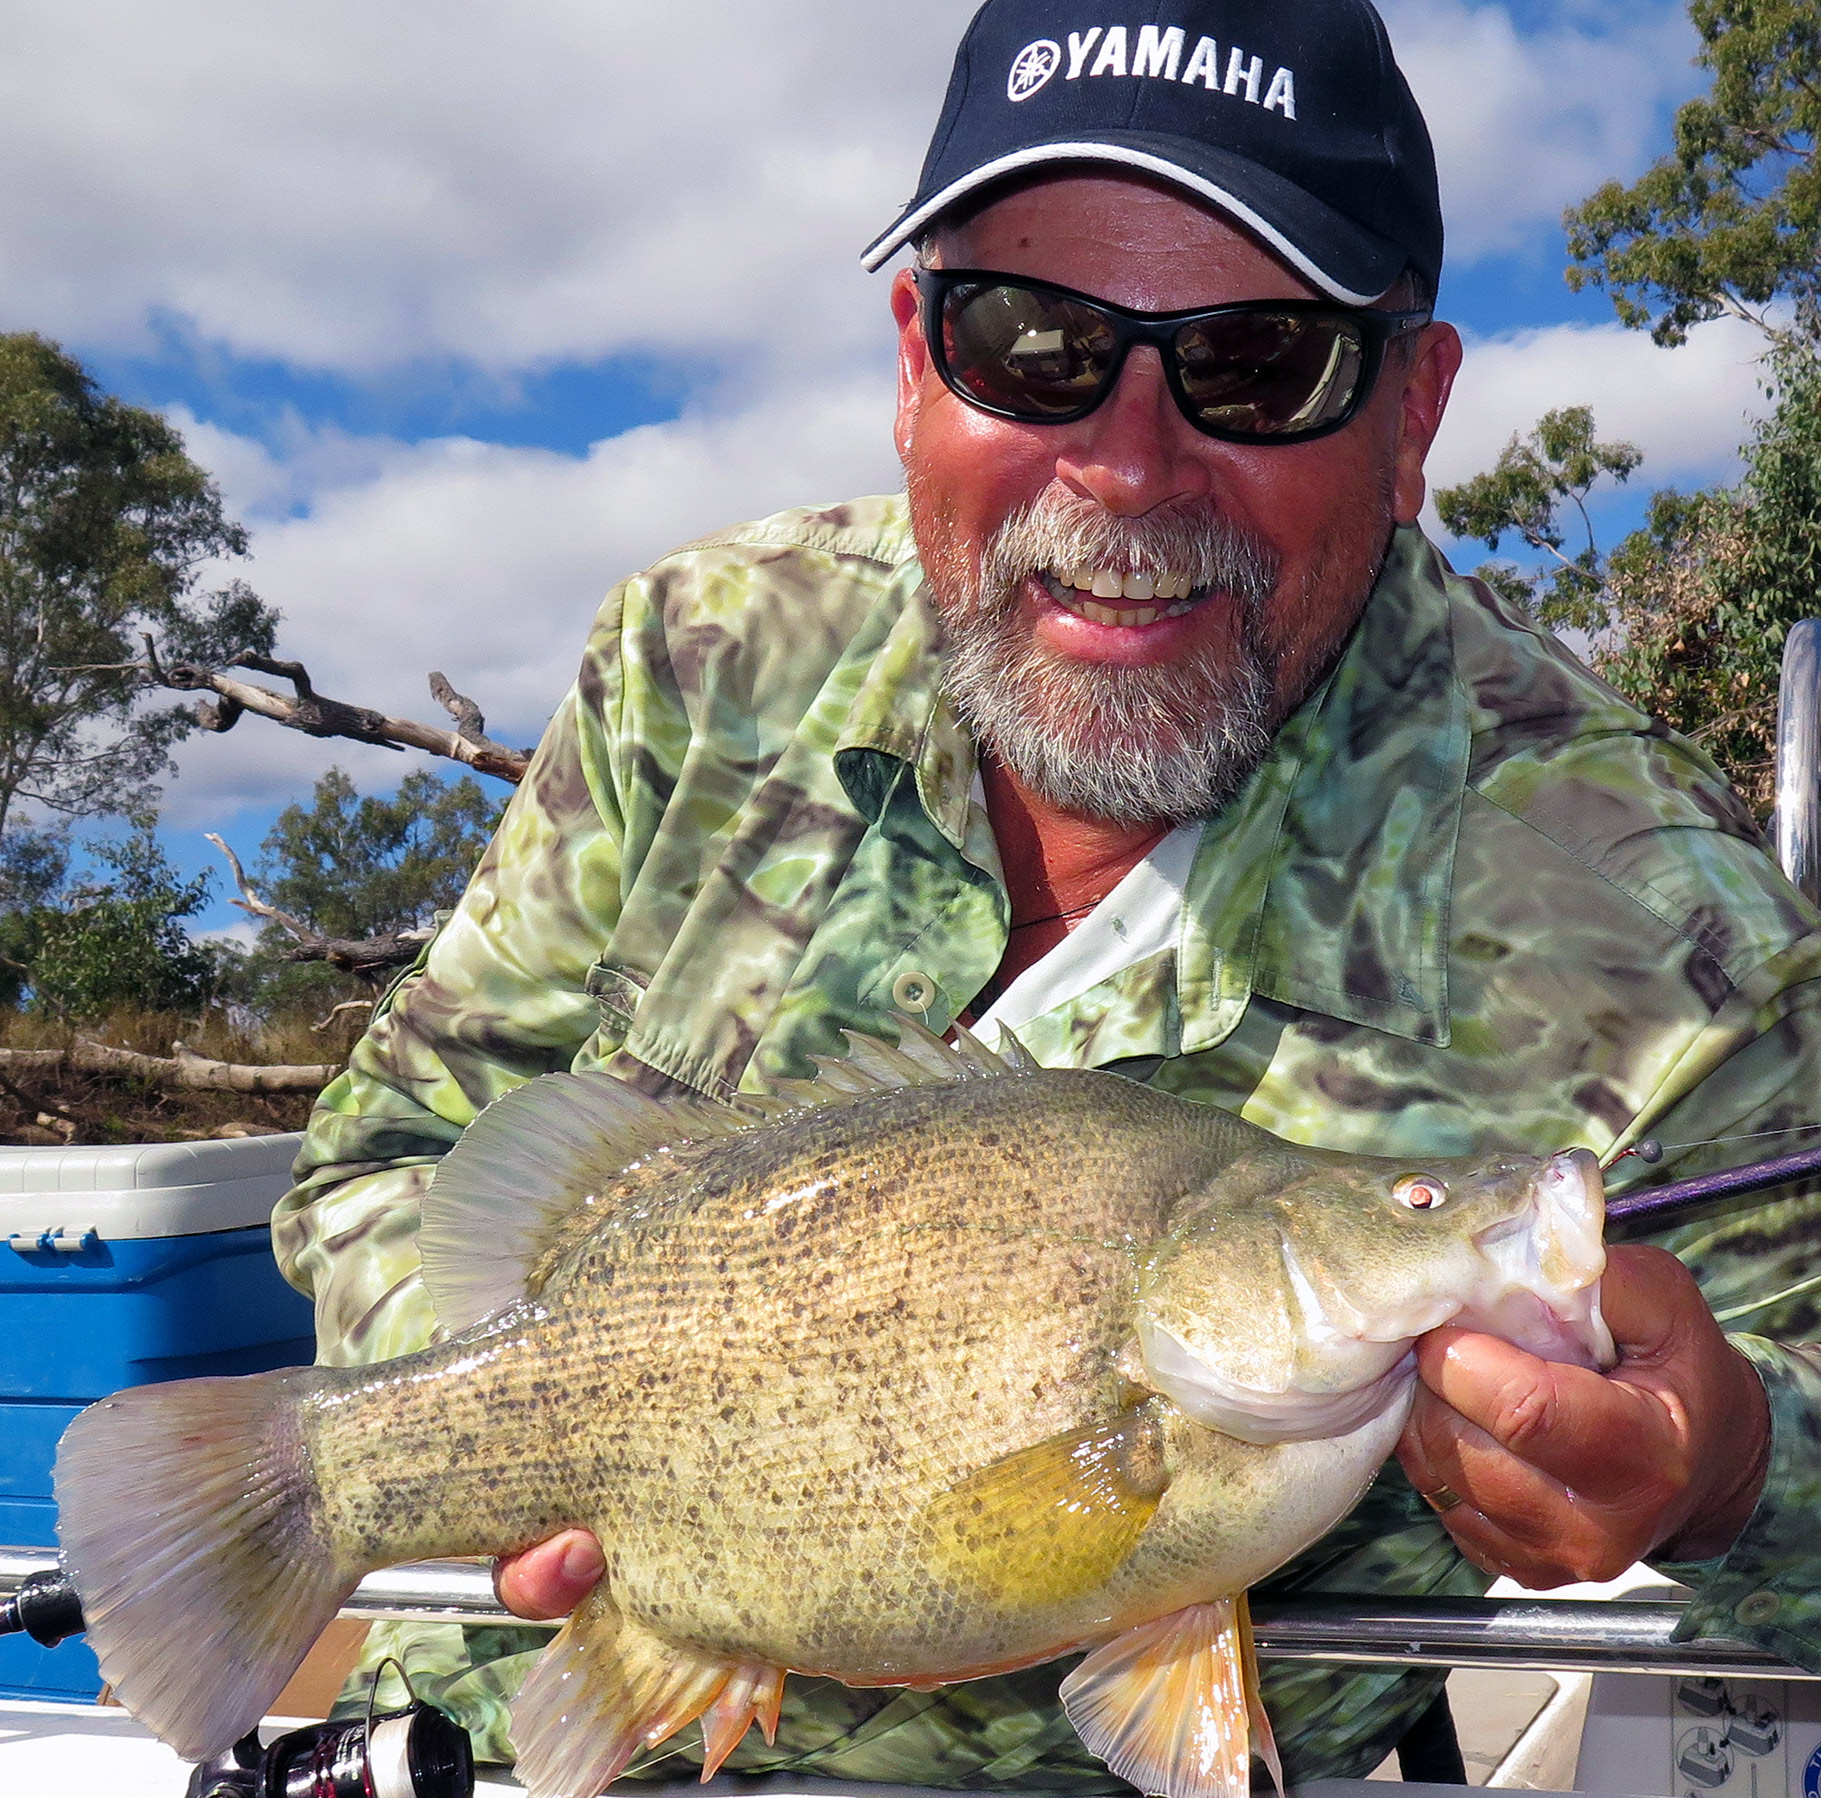 There are plenty of golden perch or yellowbelly in Cania, too.